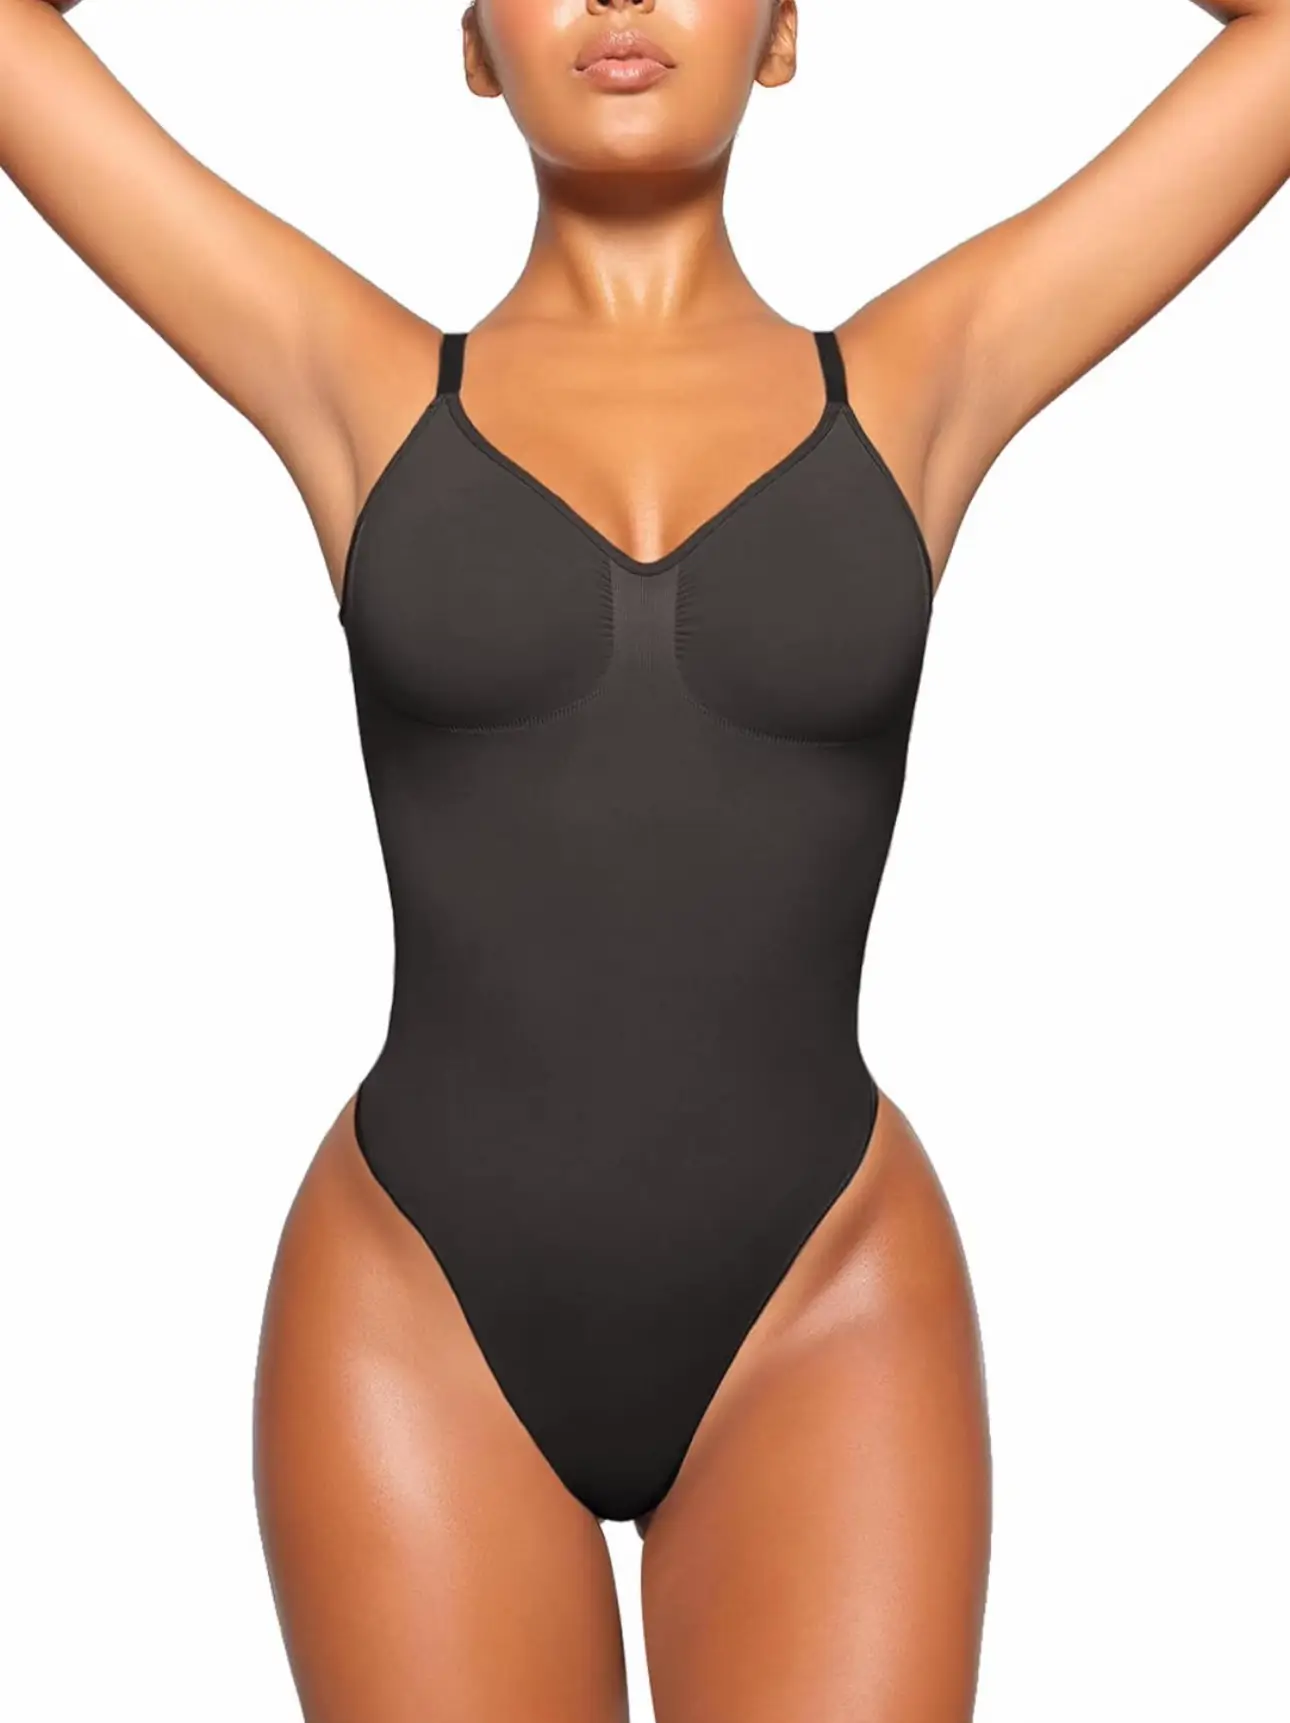 s Skims Bodysuit Dupe Is an Affordable, Quality One-Piece